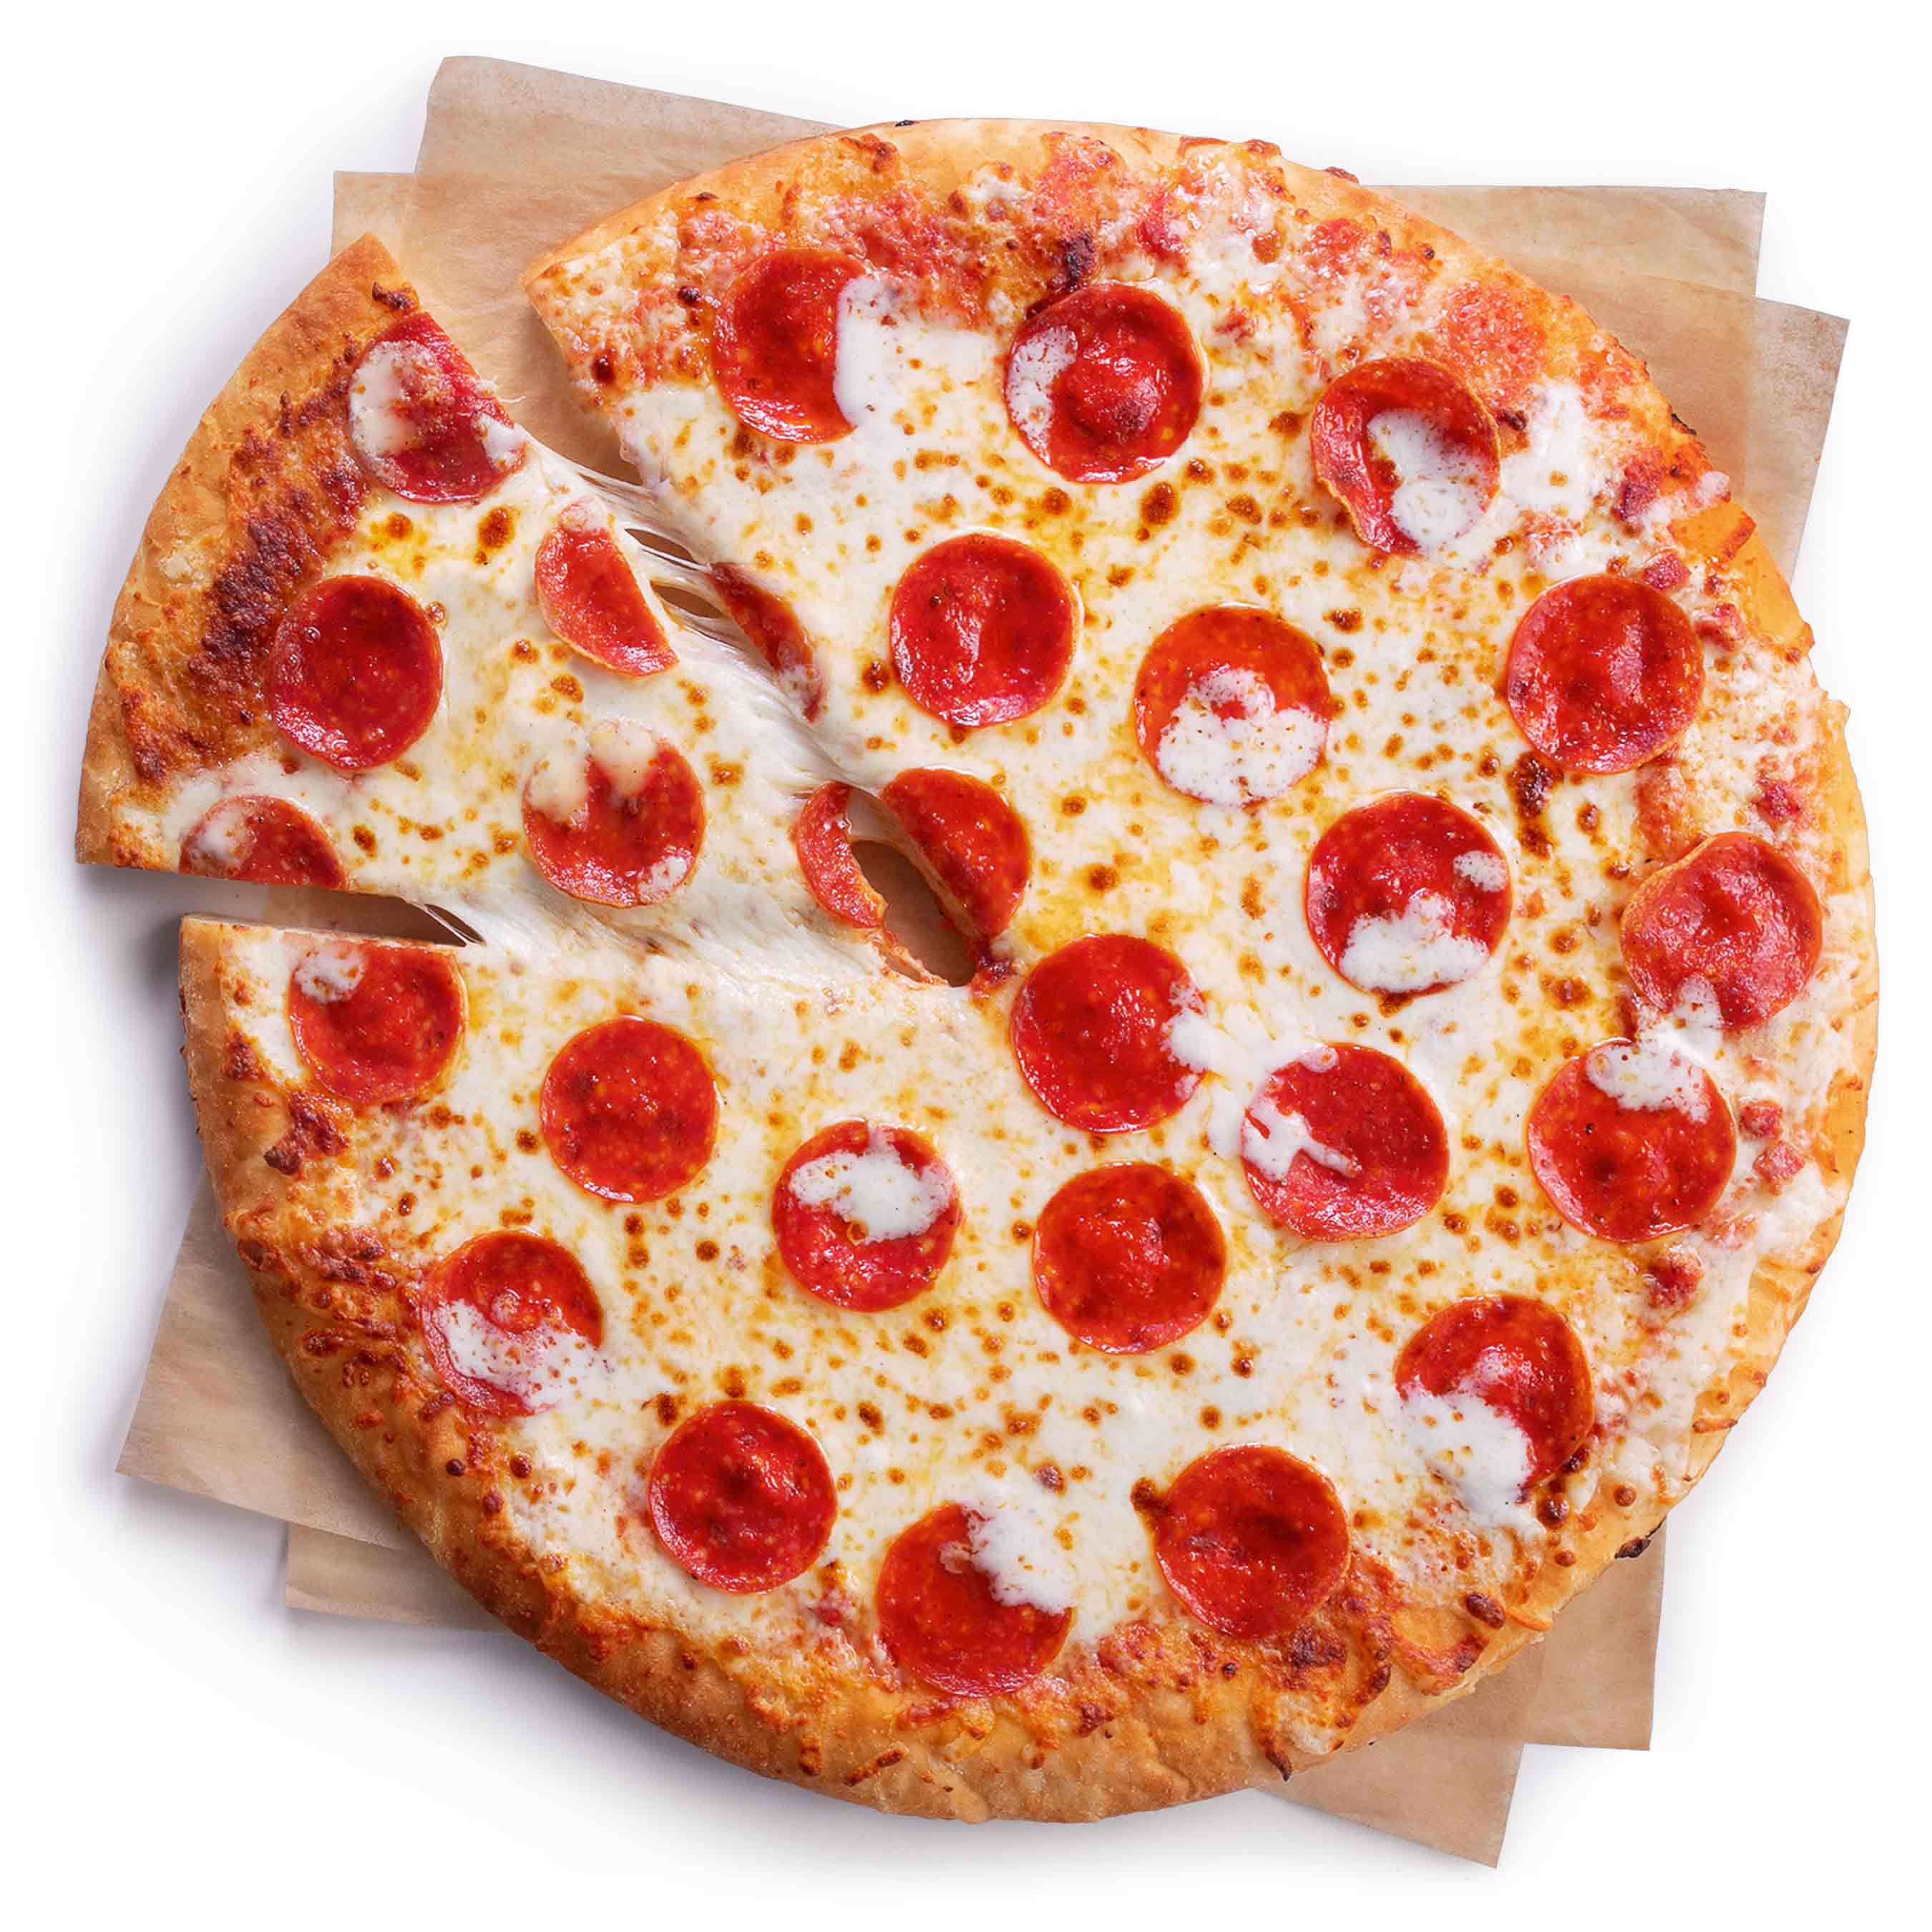 7-Eleven: Whole Large Pizza (Pepperoni, Extreme Meat, Triple Cheese)